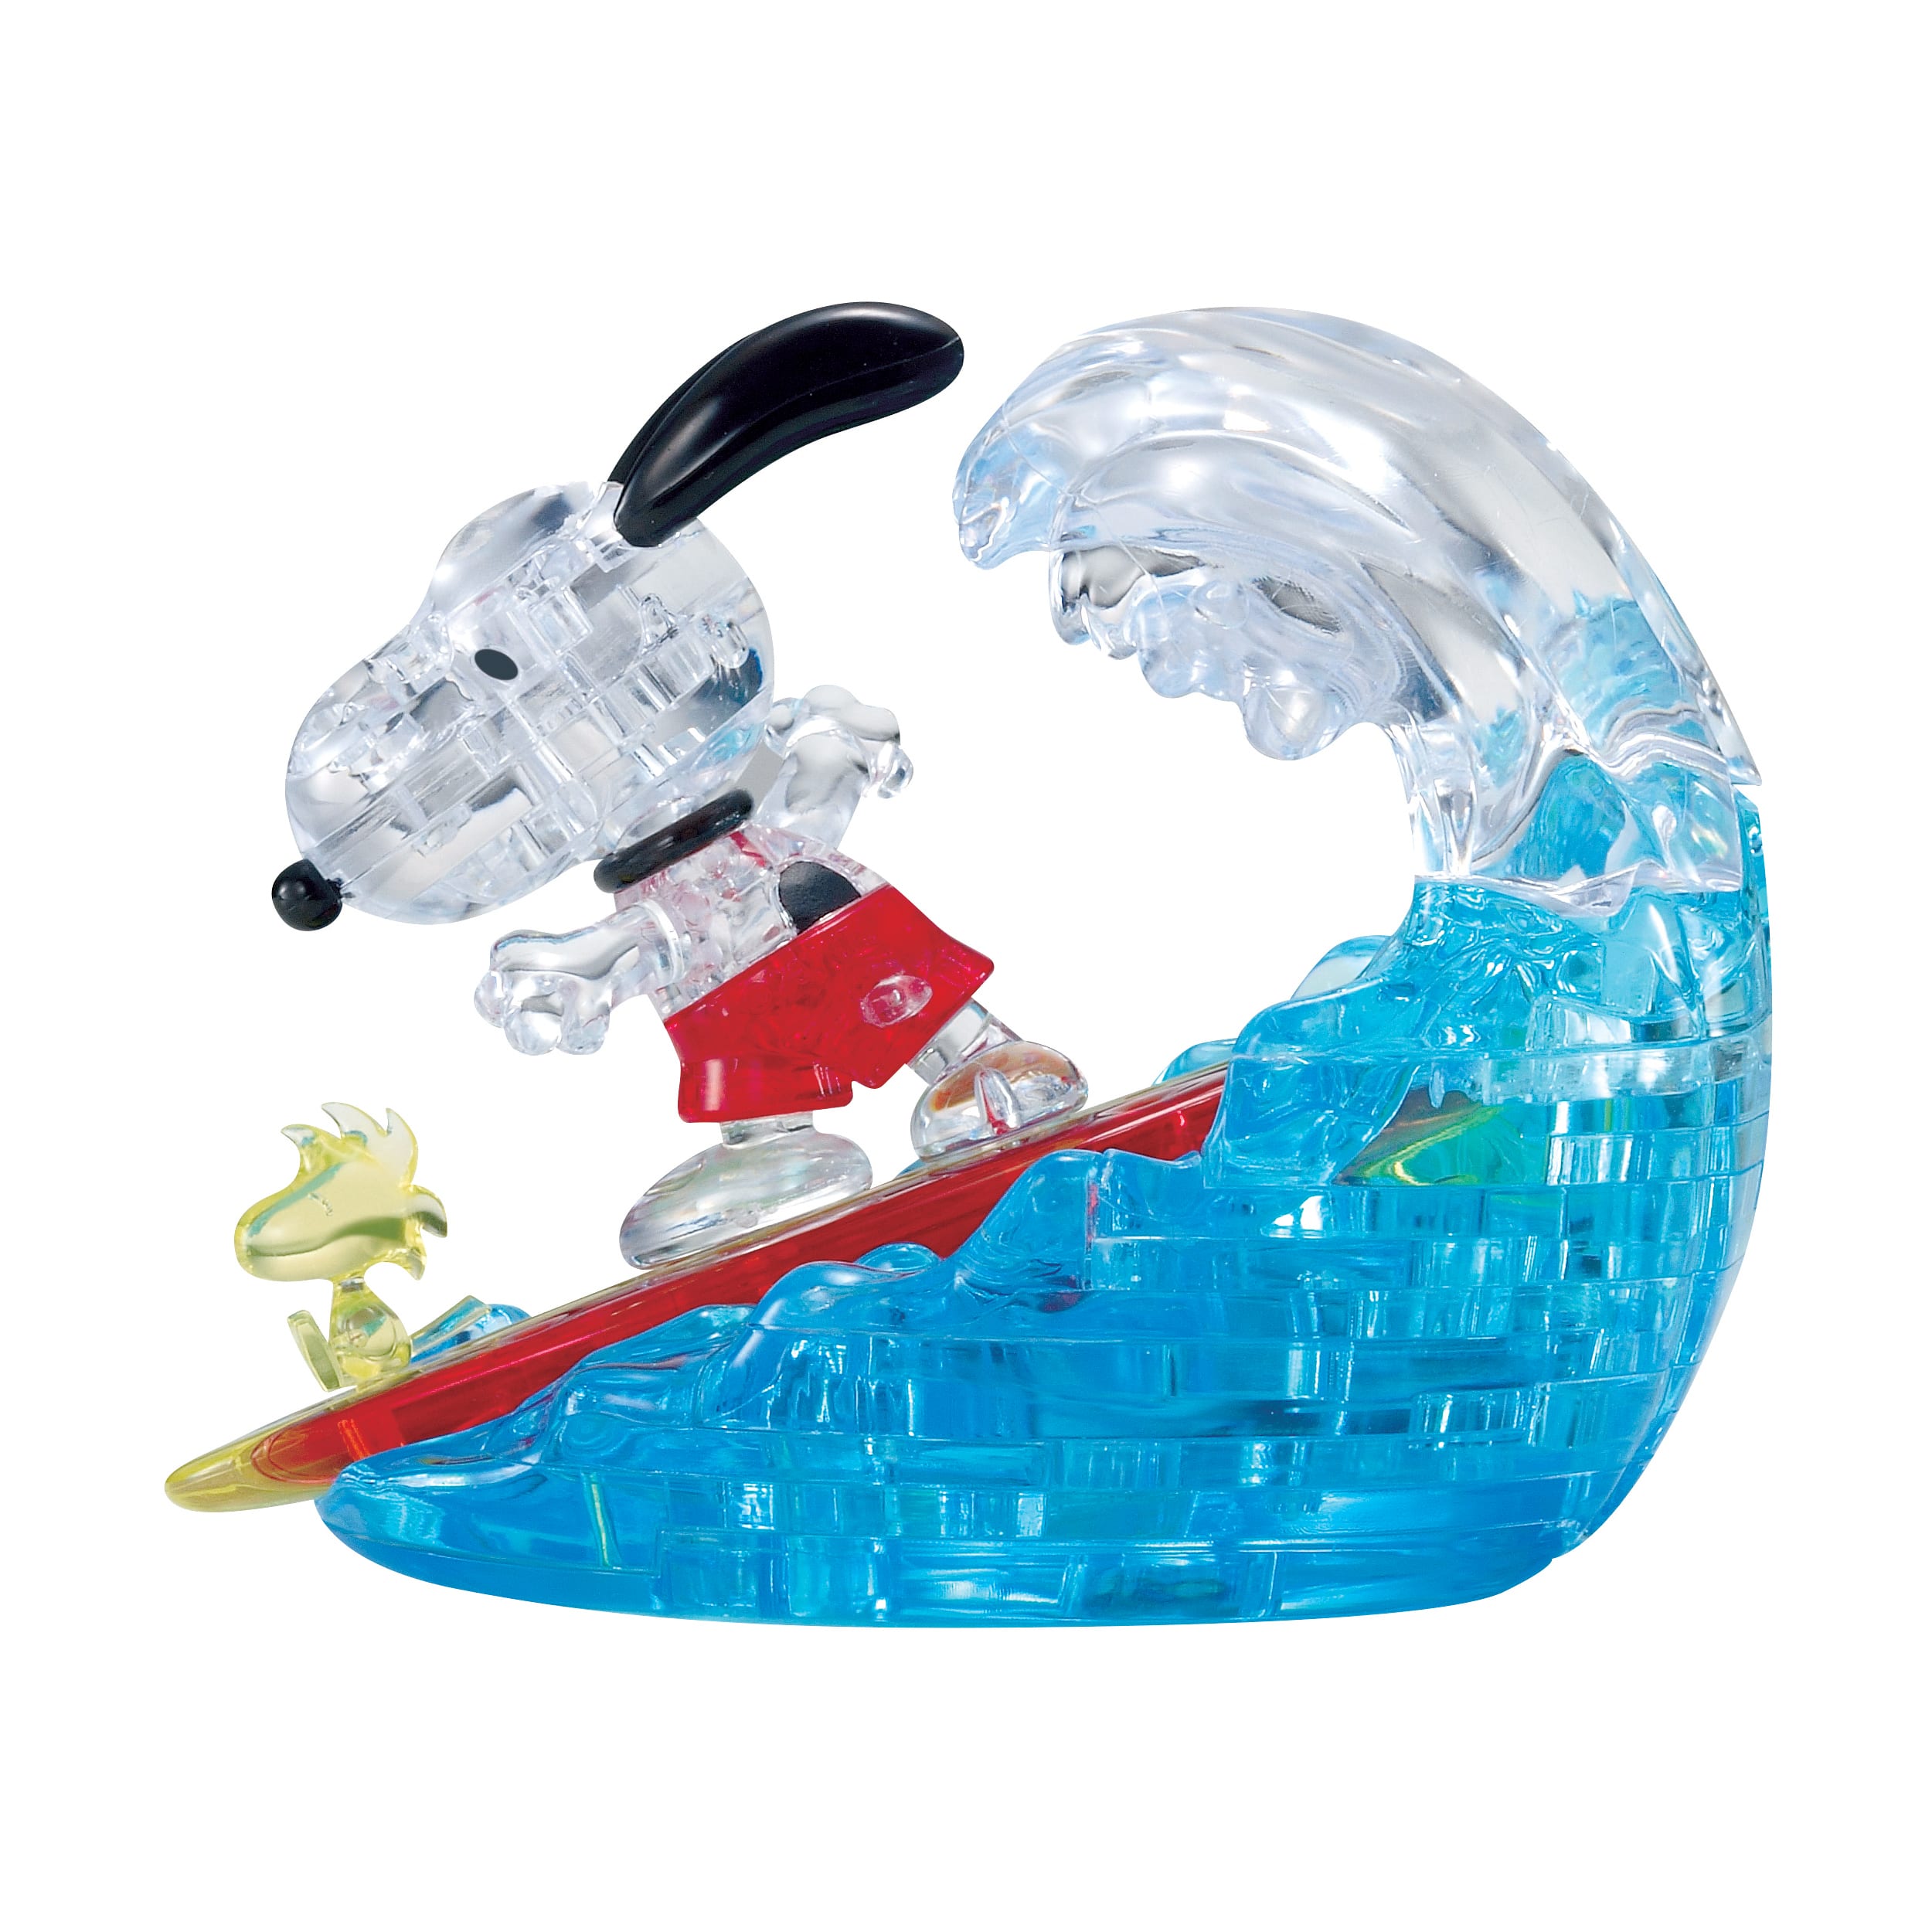 Snoopy Surfing 41 Teile 3D Crystal Puzzle 